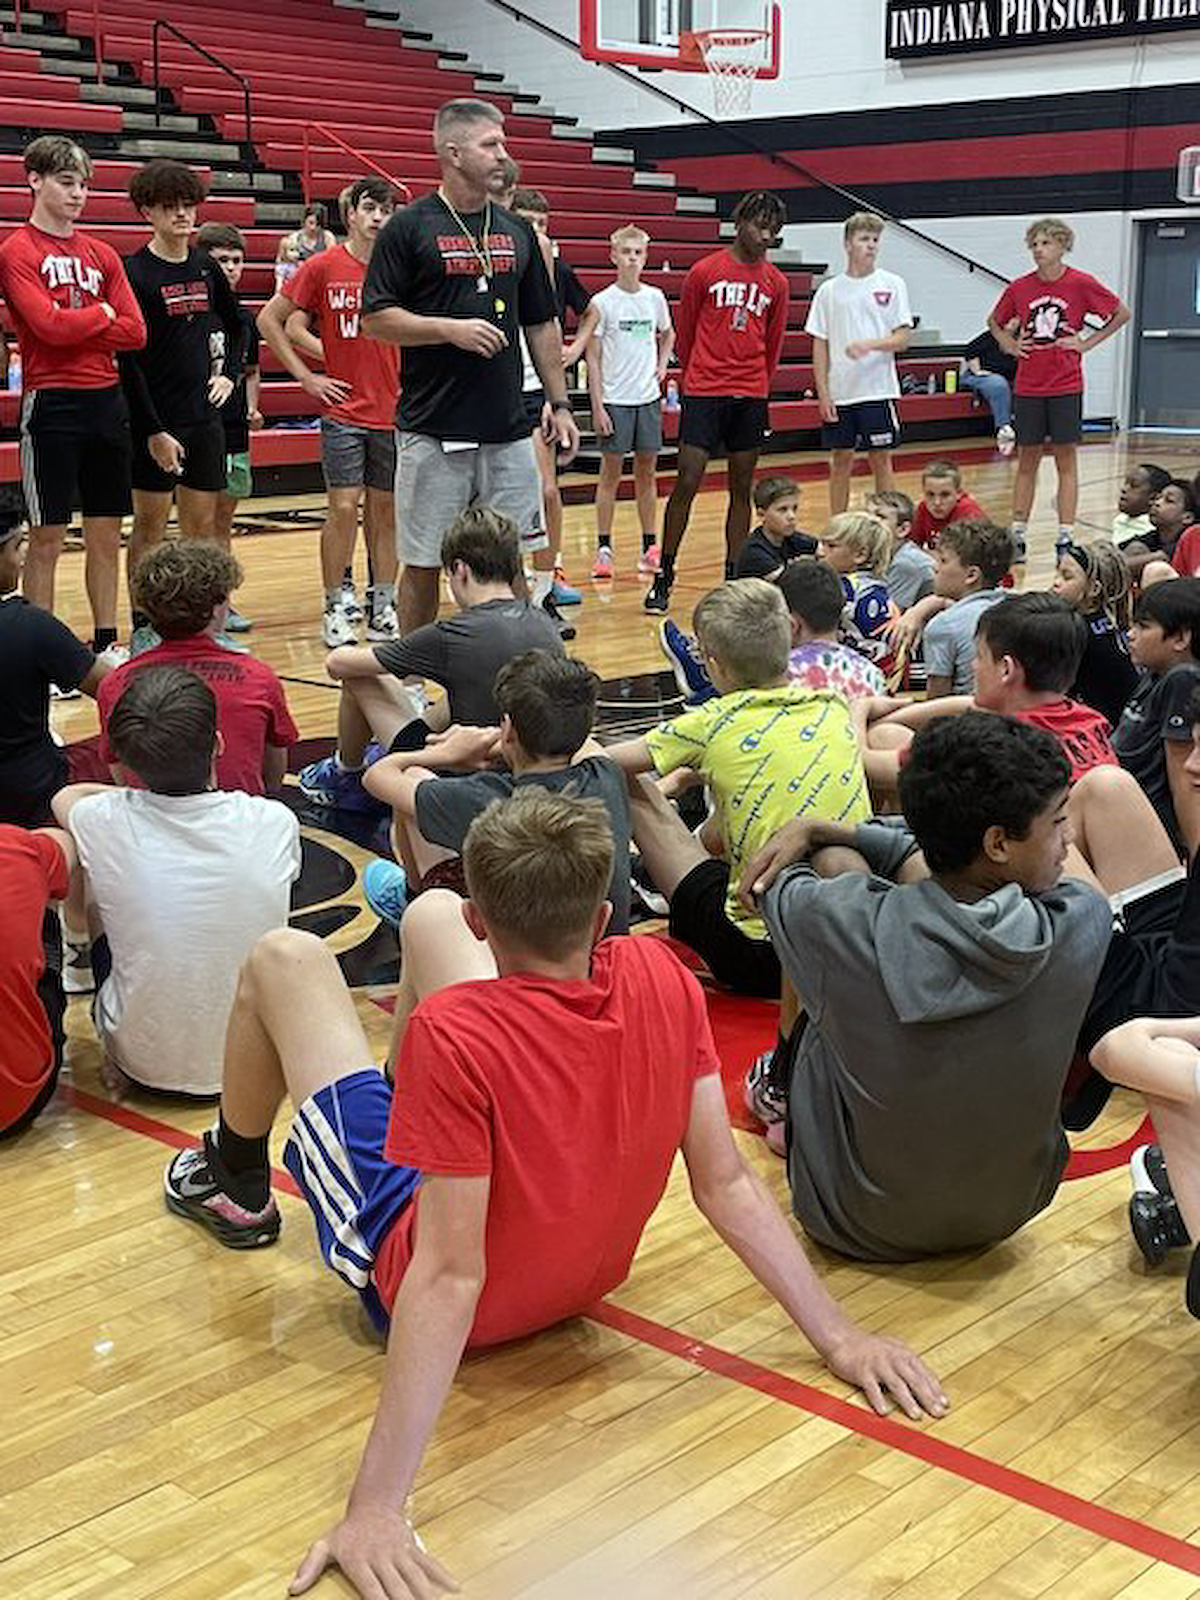 Basketball Youth Summer Camp Hosted by Boys Basketball gallery cover photo